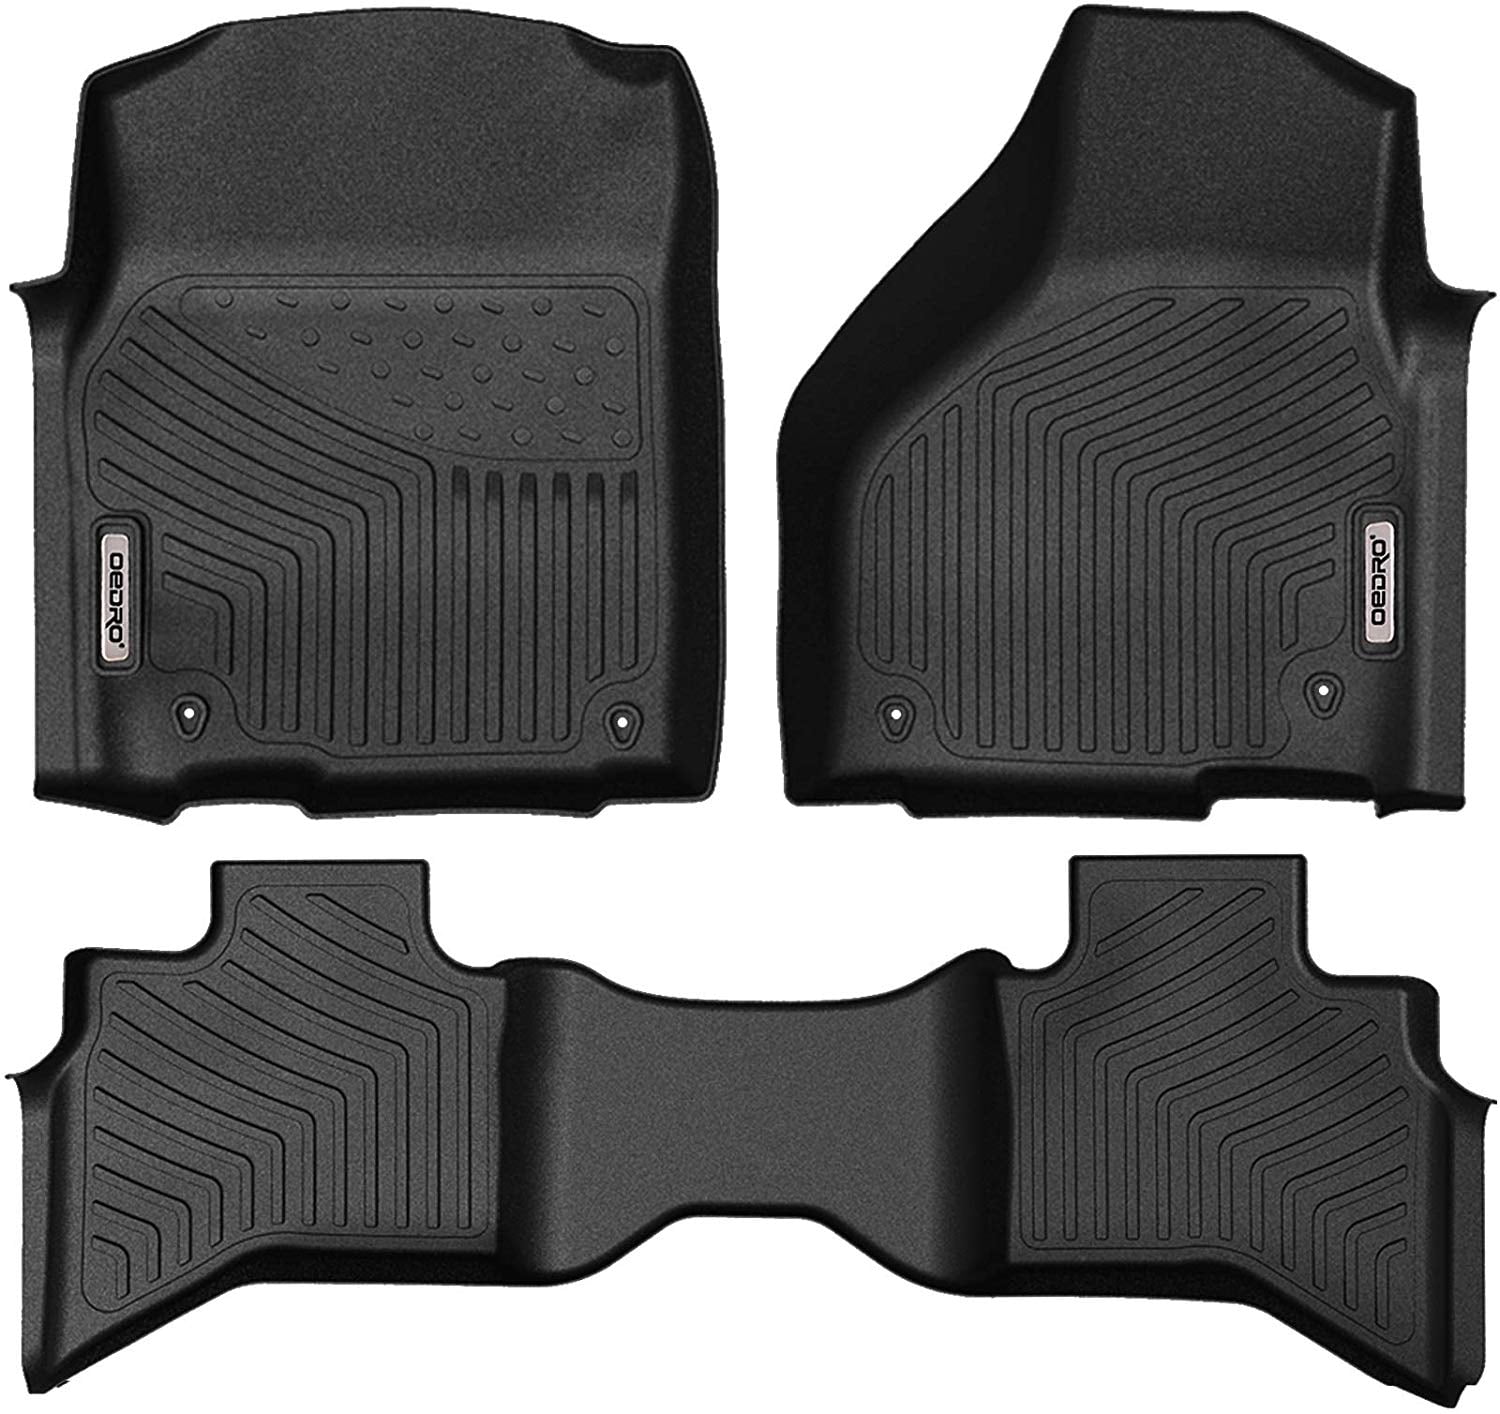 Full Set Liners Unique Black TPE All-Weather Guard Includes 1st and 2nd Row: Front Rear oEdRo Floor Mats Compatible for 2015-2019 Ford Edge 